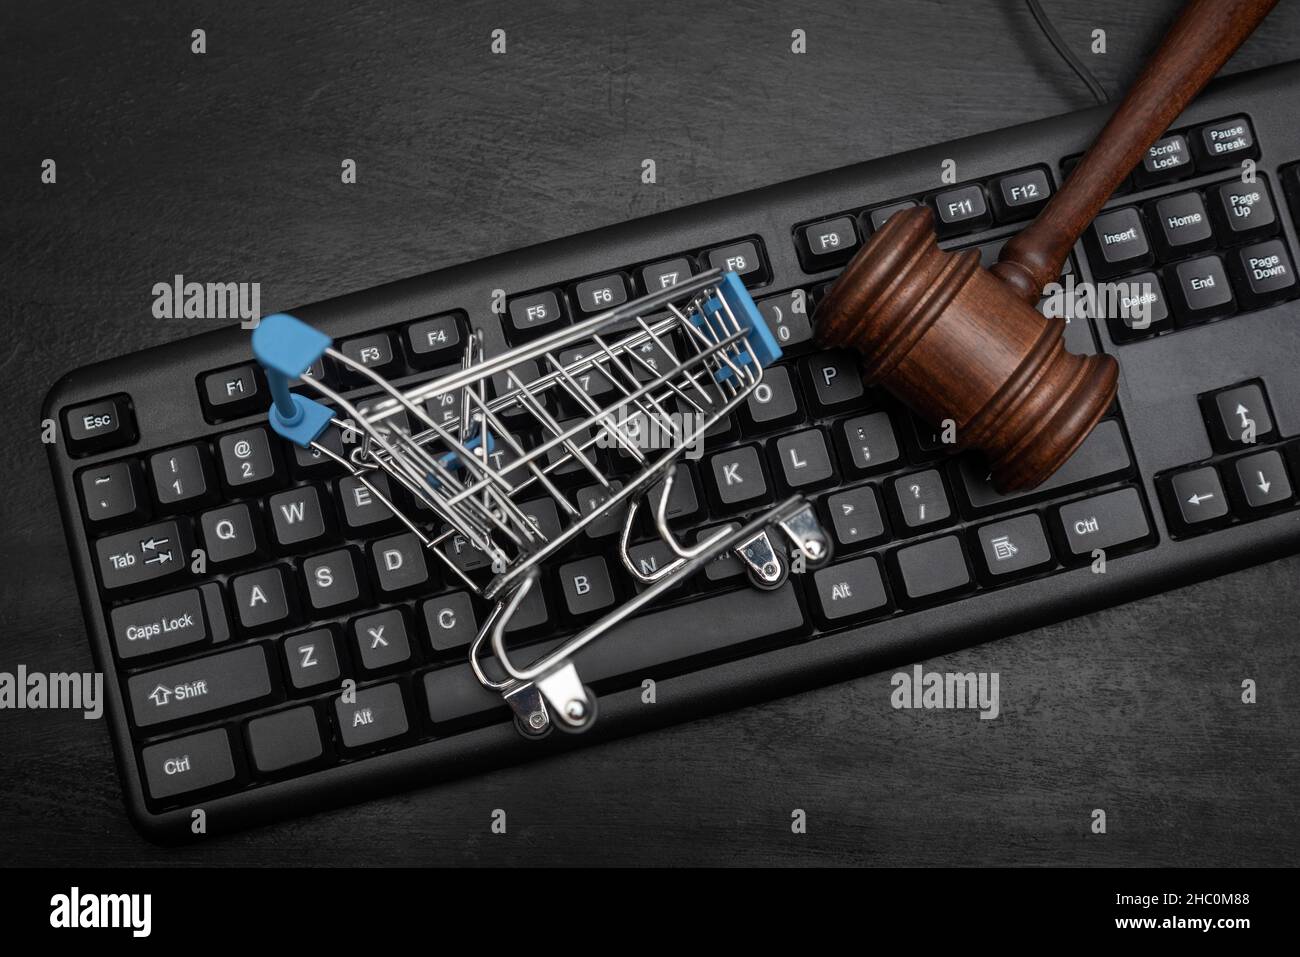 Keyboard, shopping cart and judges hammer. Online Auction Stock Photo